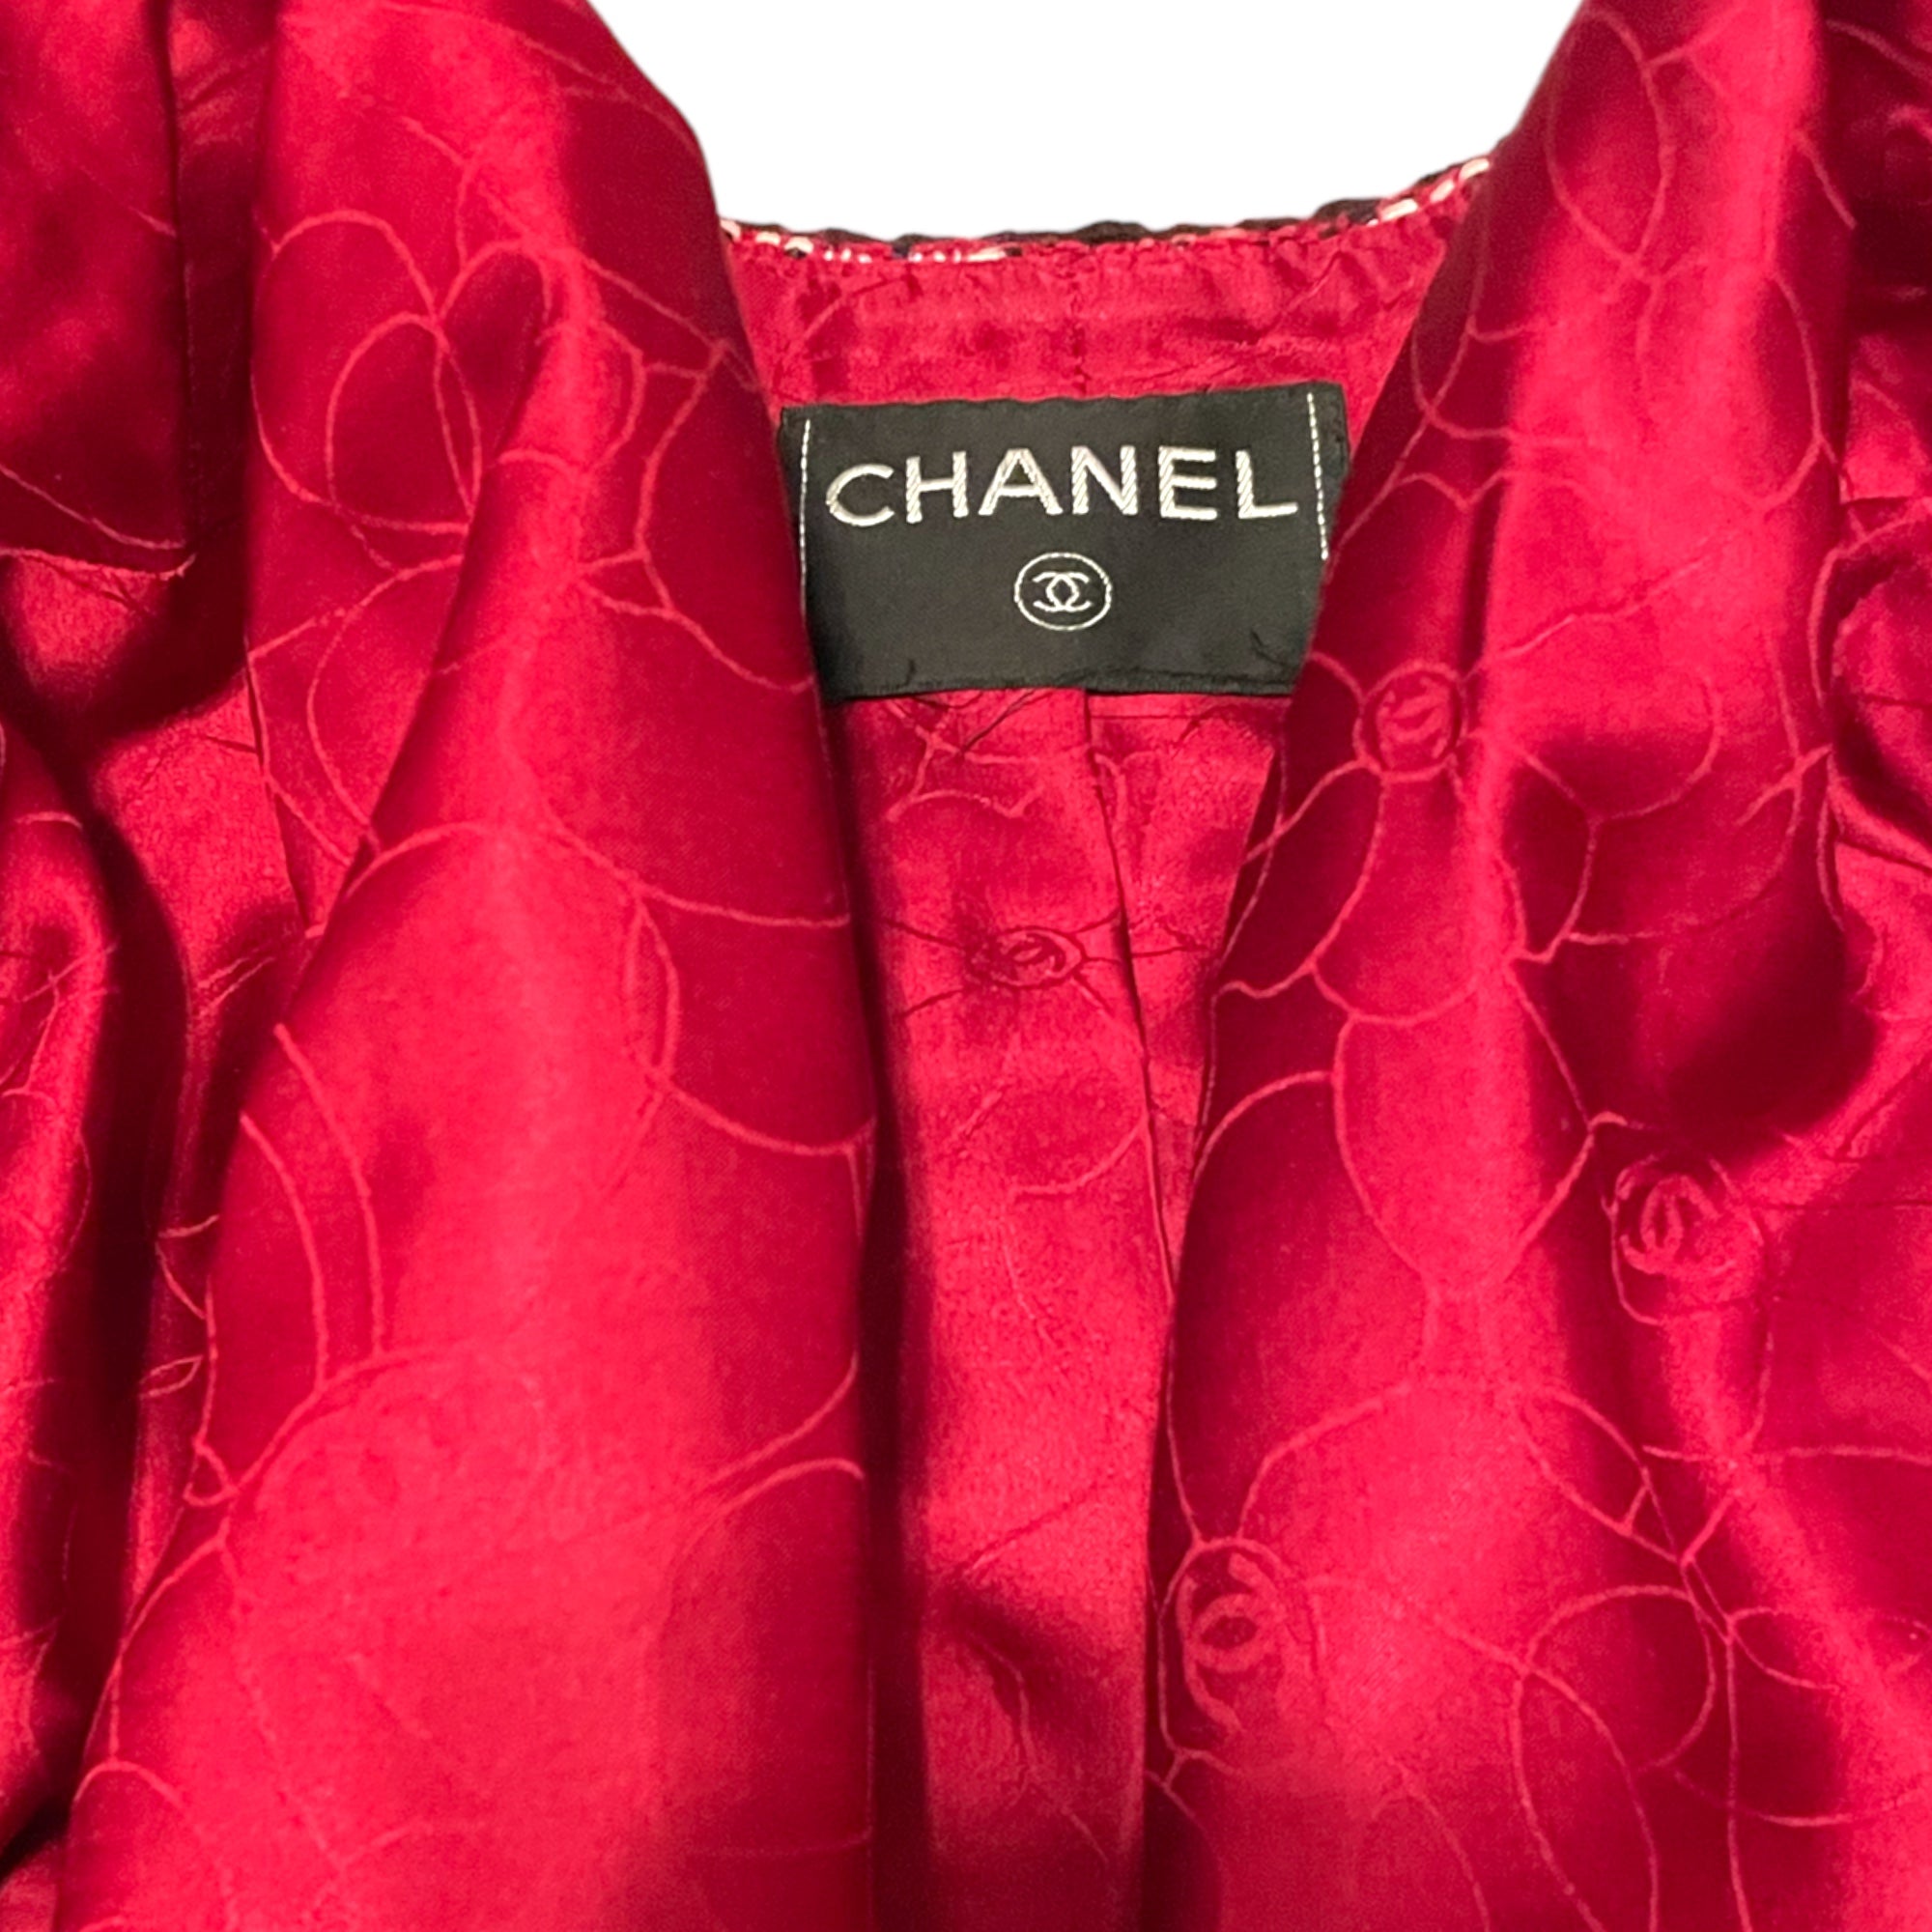 CHANEL Vintage FALL 2001 Collection Burgundy Tweed Patterned Jacket